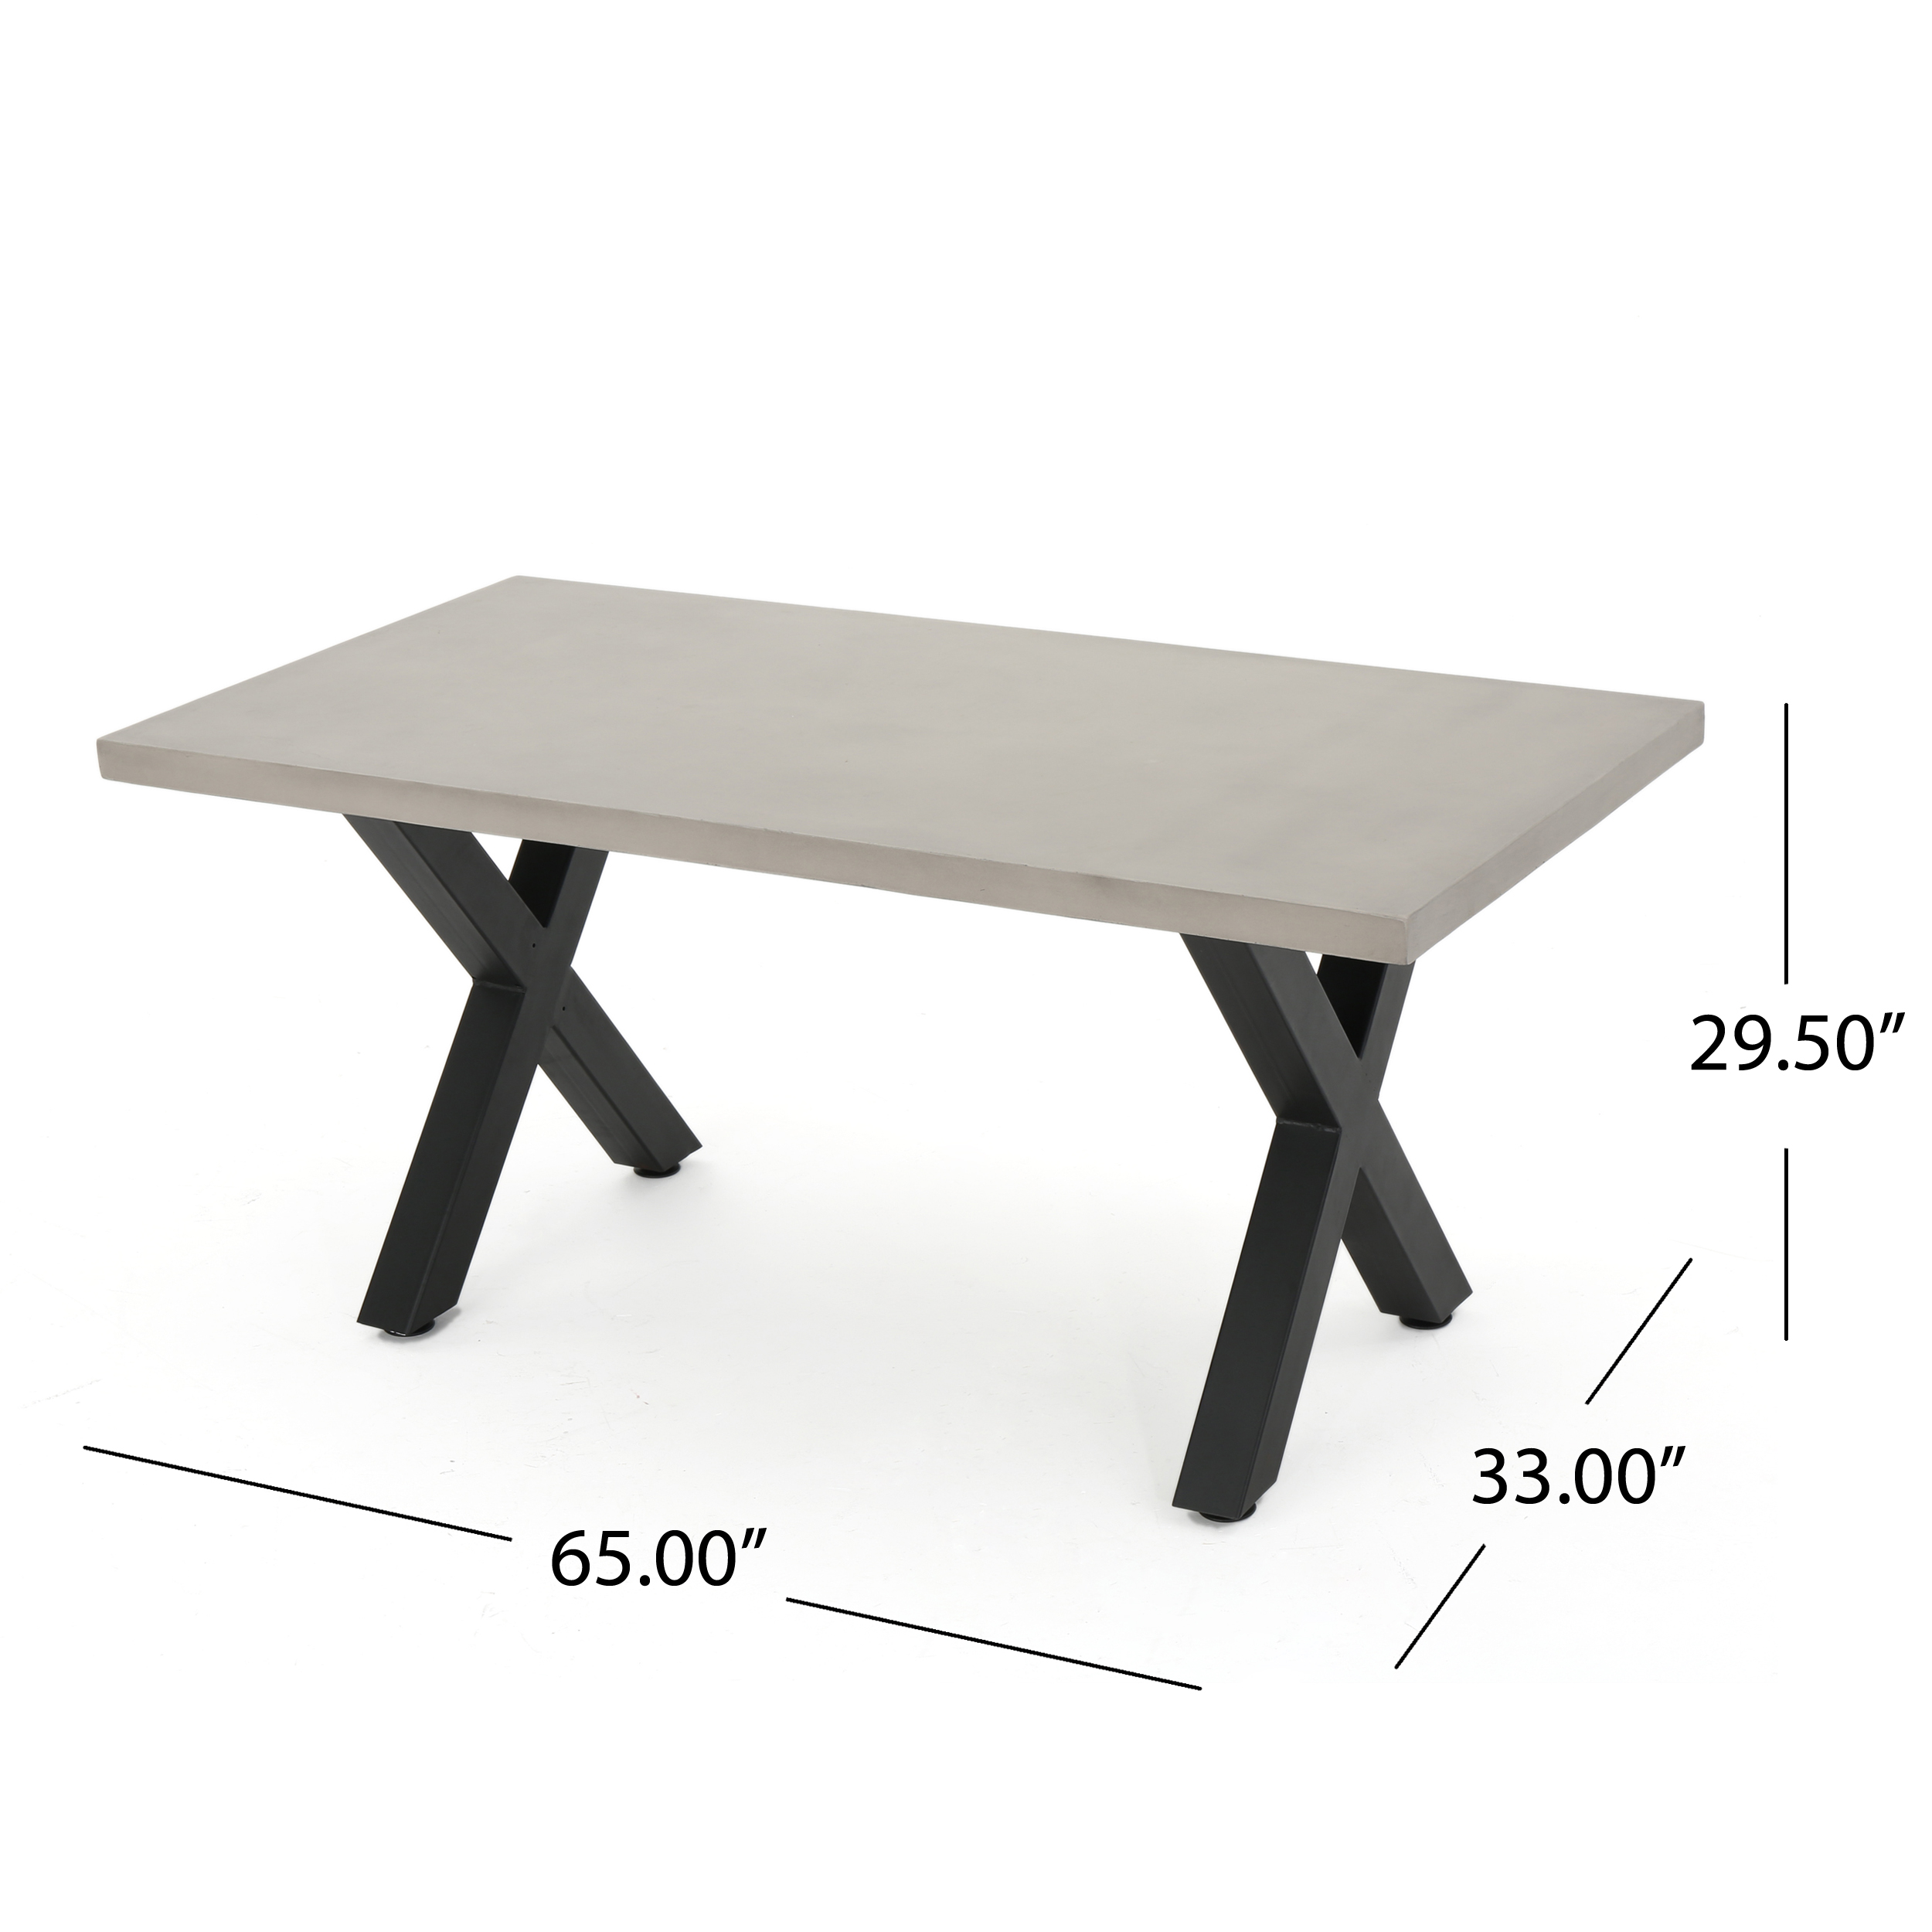 Gabriel Outdoor Light-Weight Concrete Rectangular Dining Table, White, Black - image 4 of 11